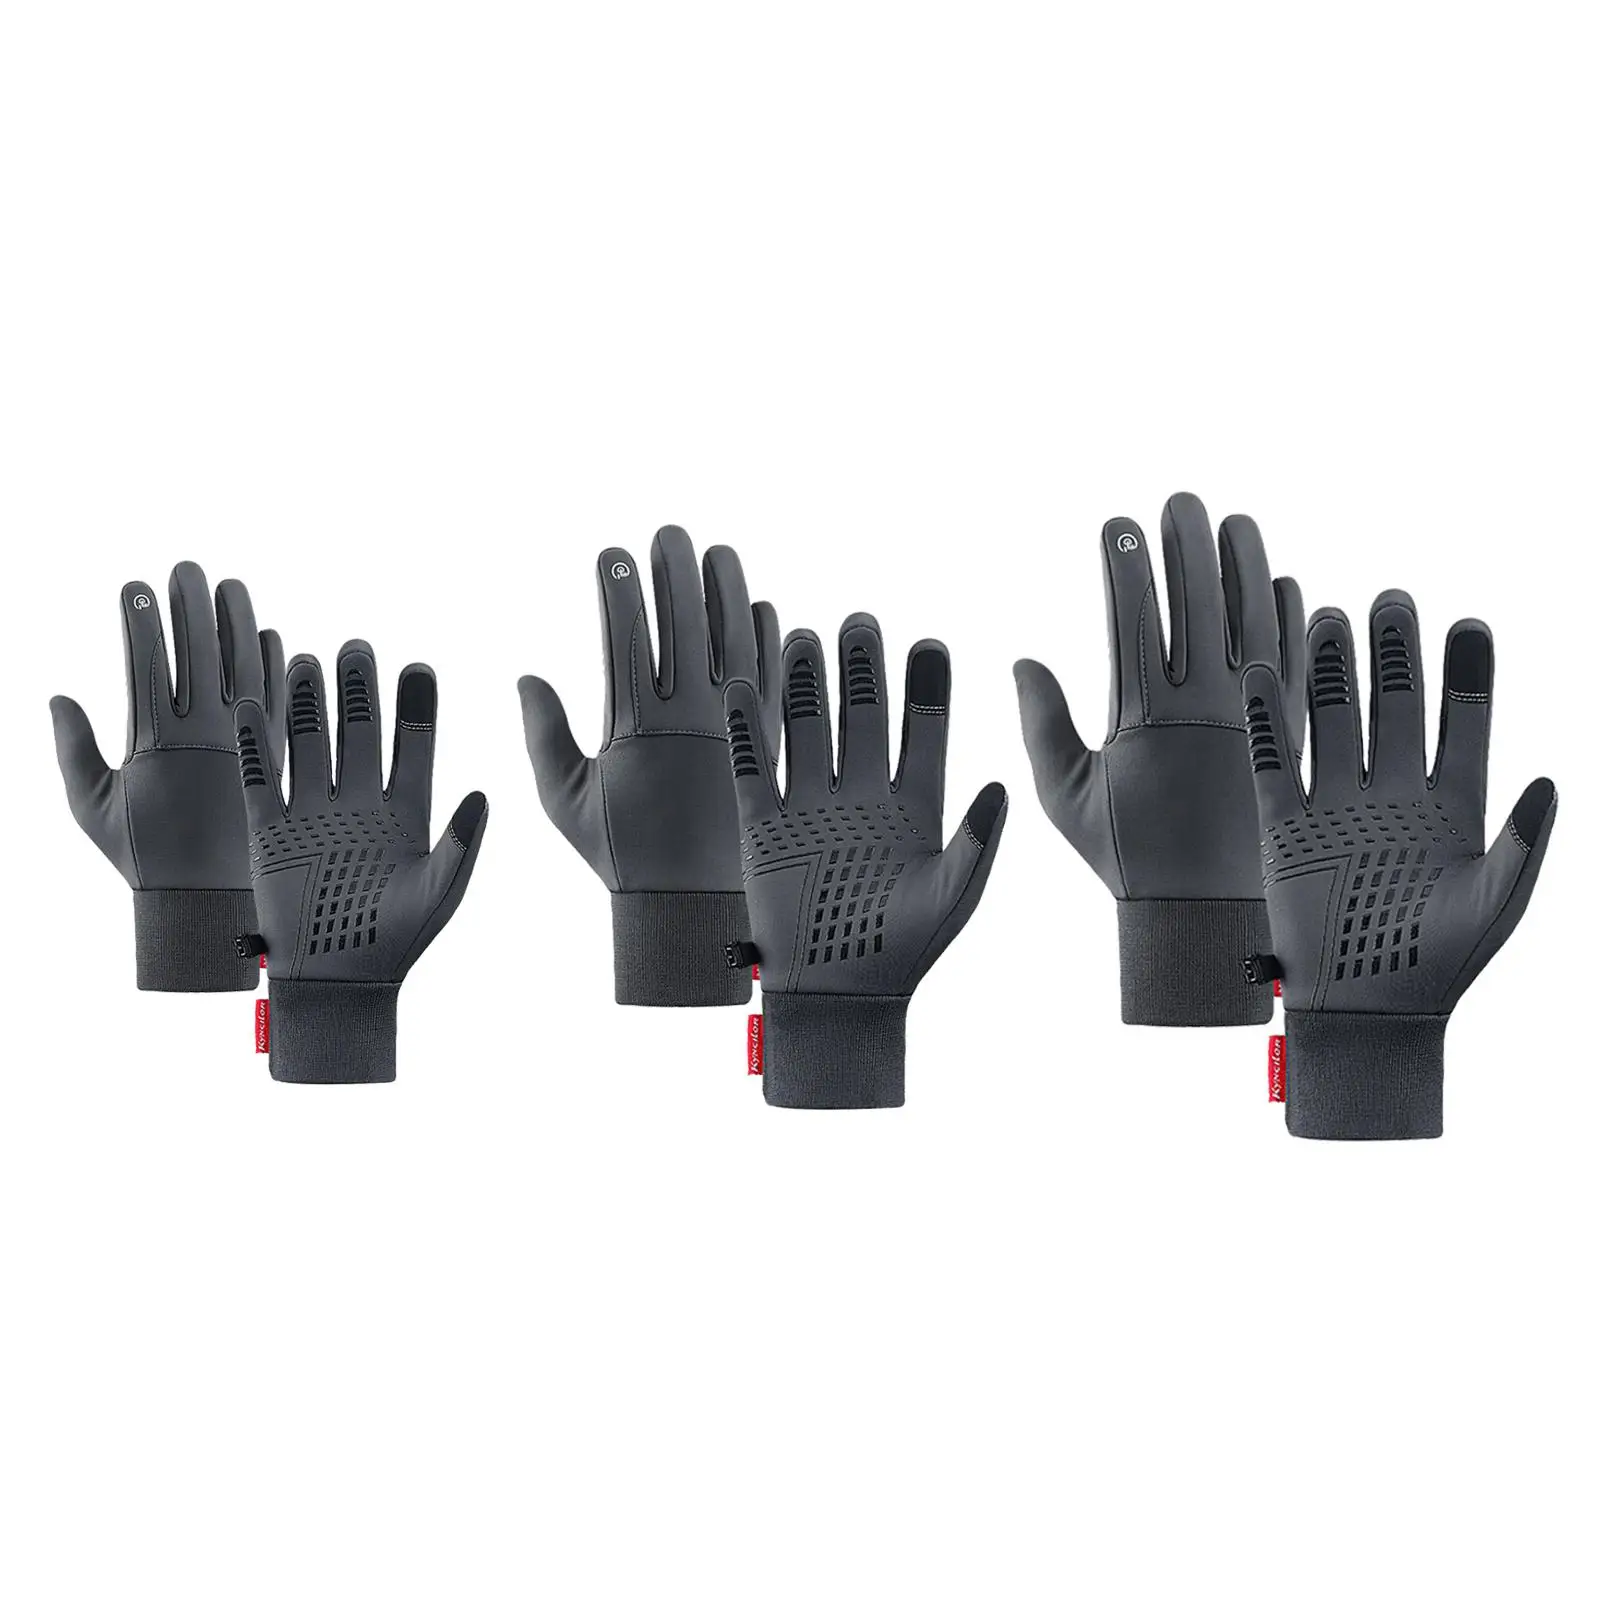 Winter Gloves Waterproof & Windproof Thermal  Winter Touch Screen Warm Gloves for Cycling, Riding, Running, Outdoor Sports